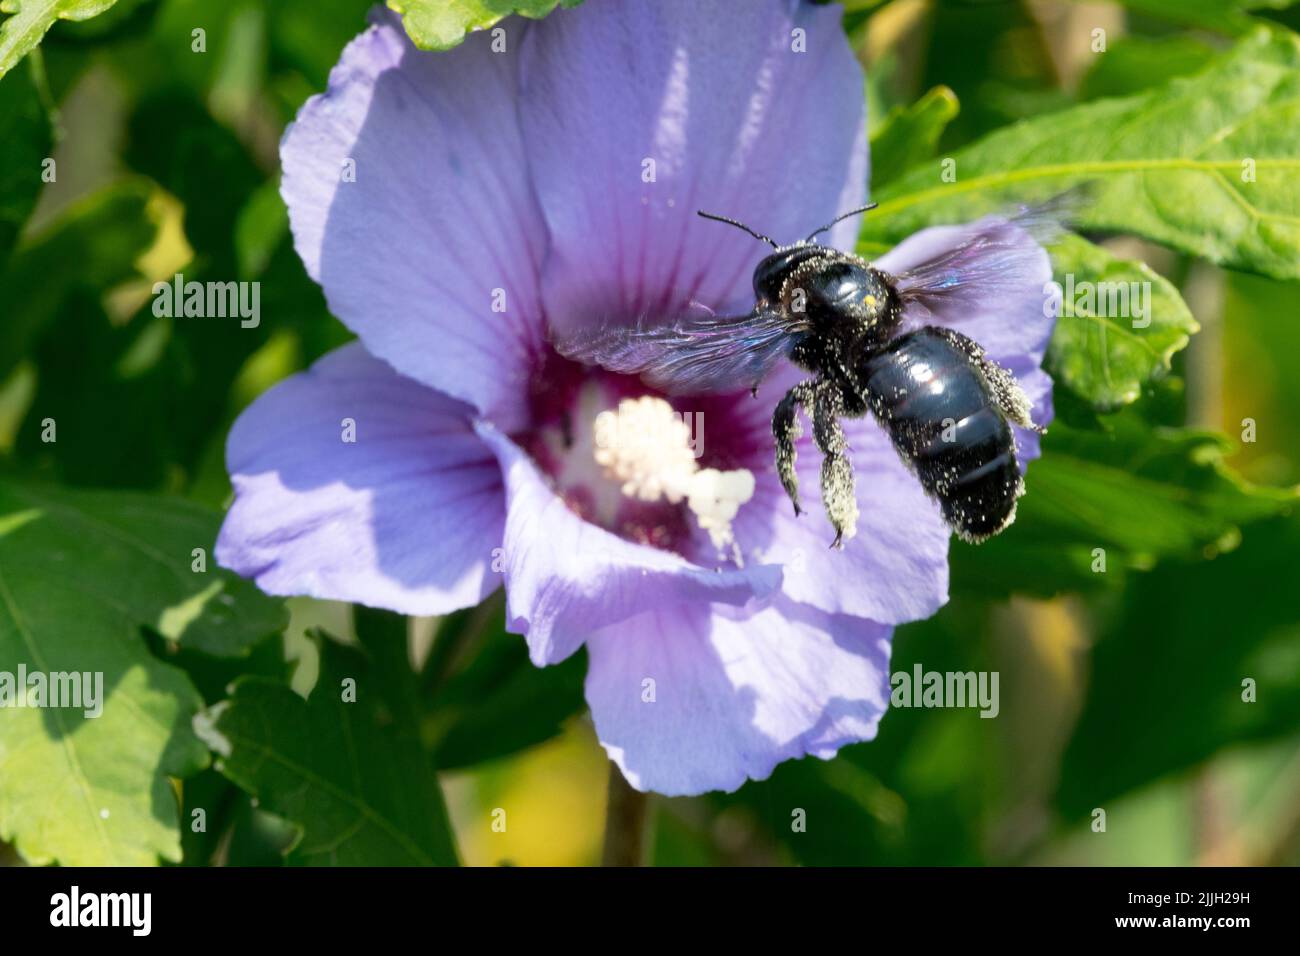 Large violet carpenter bee flying Xylocopa violace, Althea, Roses of Sharon flower Hibiscus 'Oiseau Bleu' Hibiscus syriacus Oiseau Bleu, pollen on bee Stock Photo